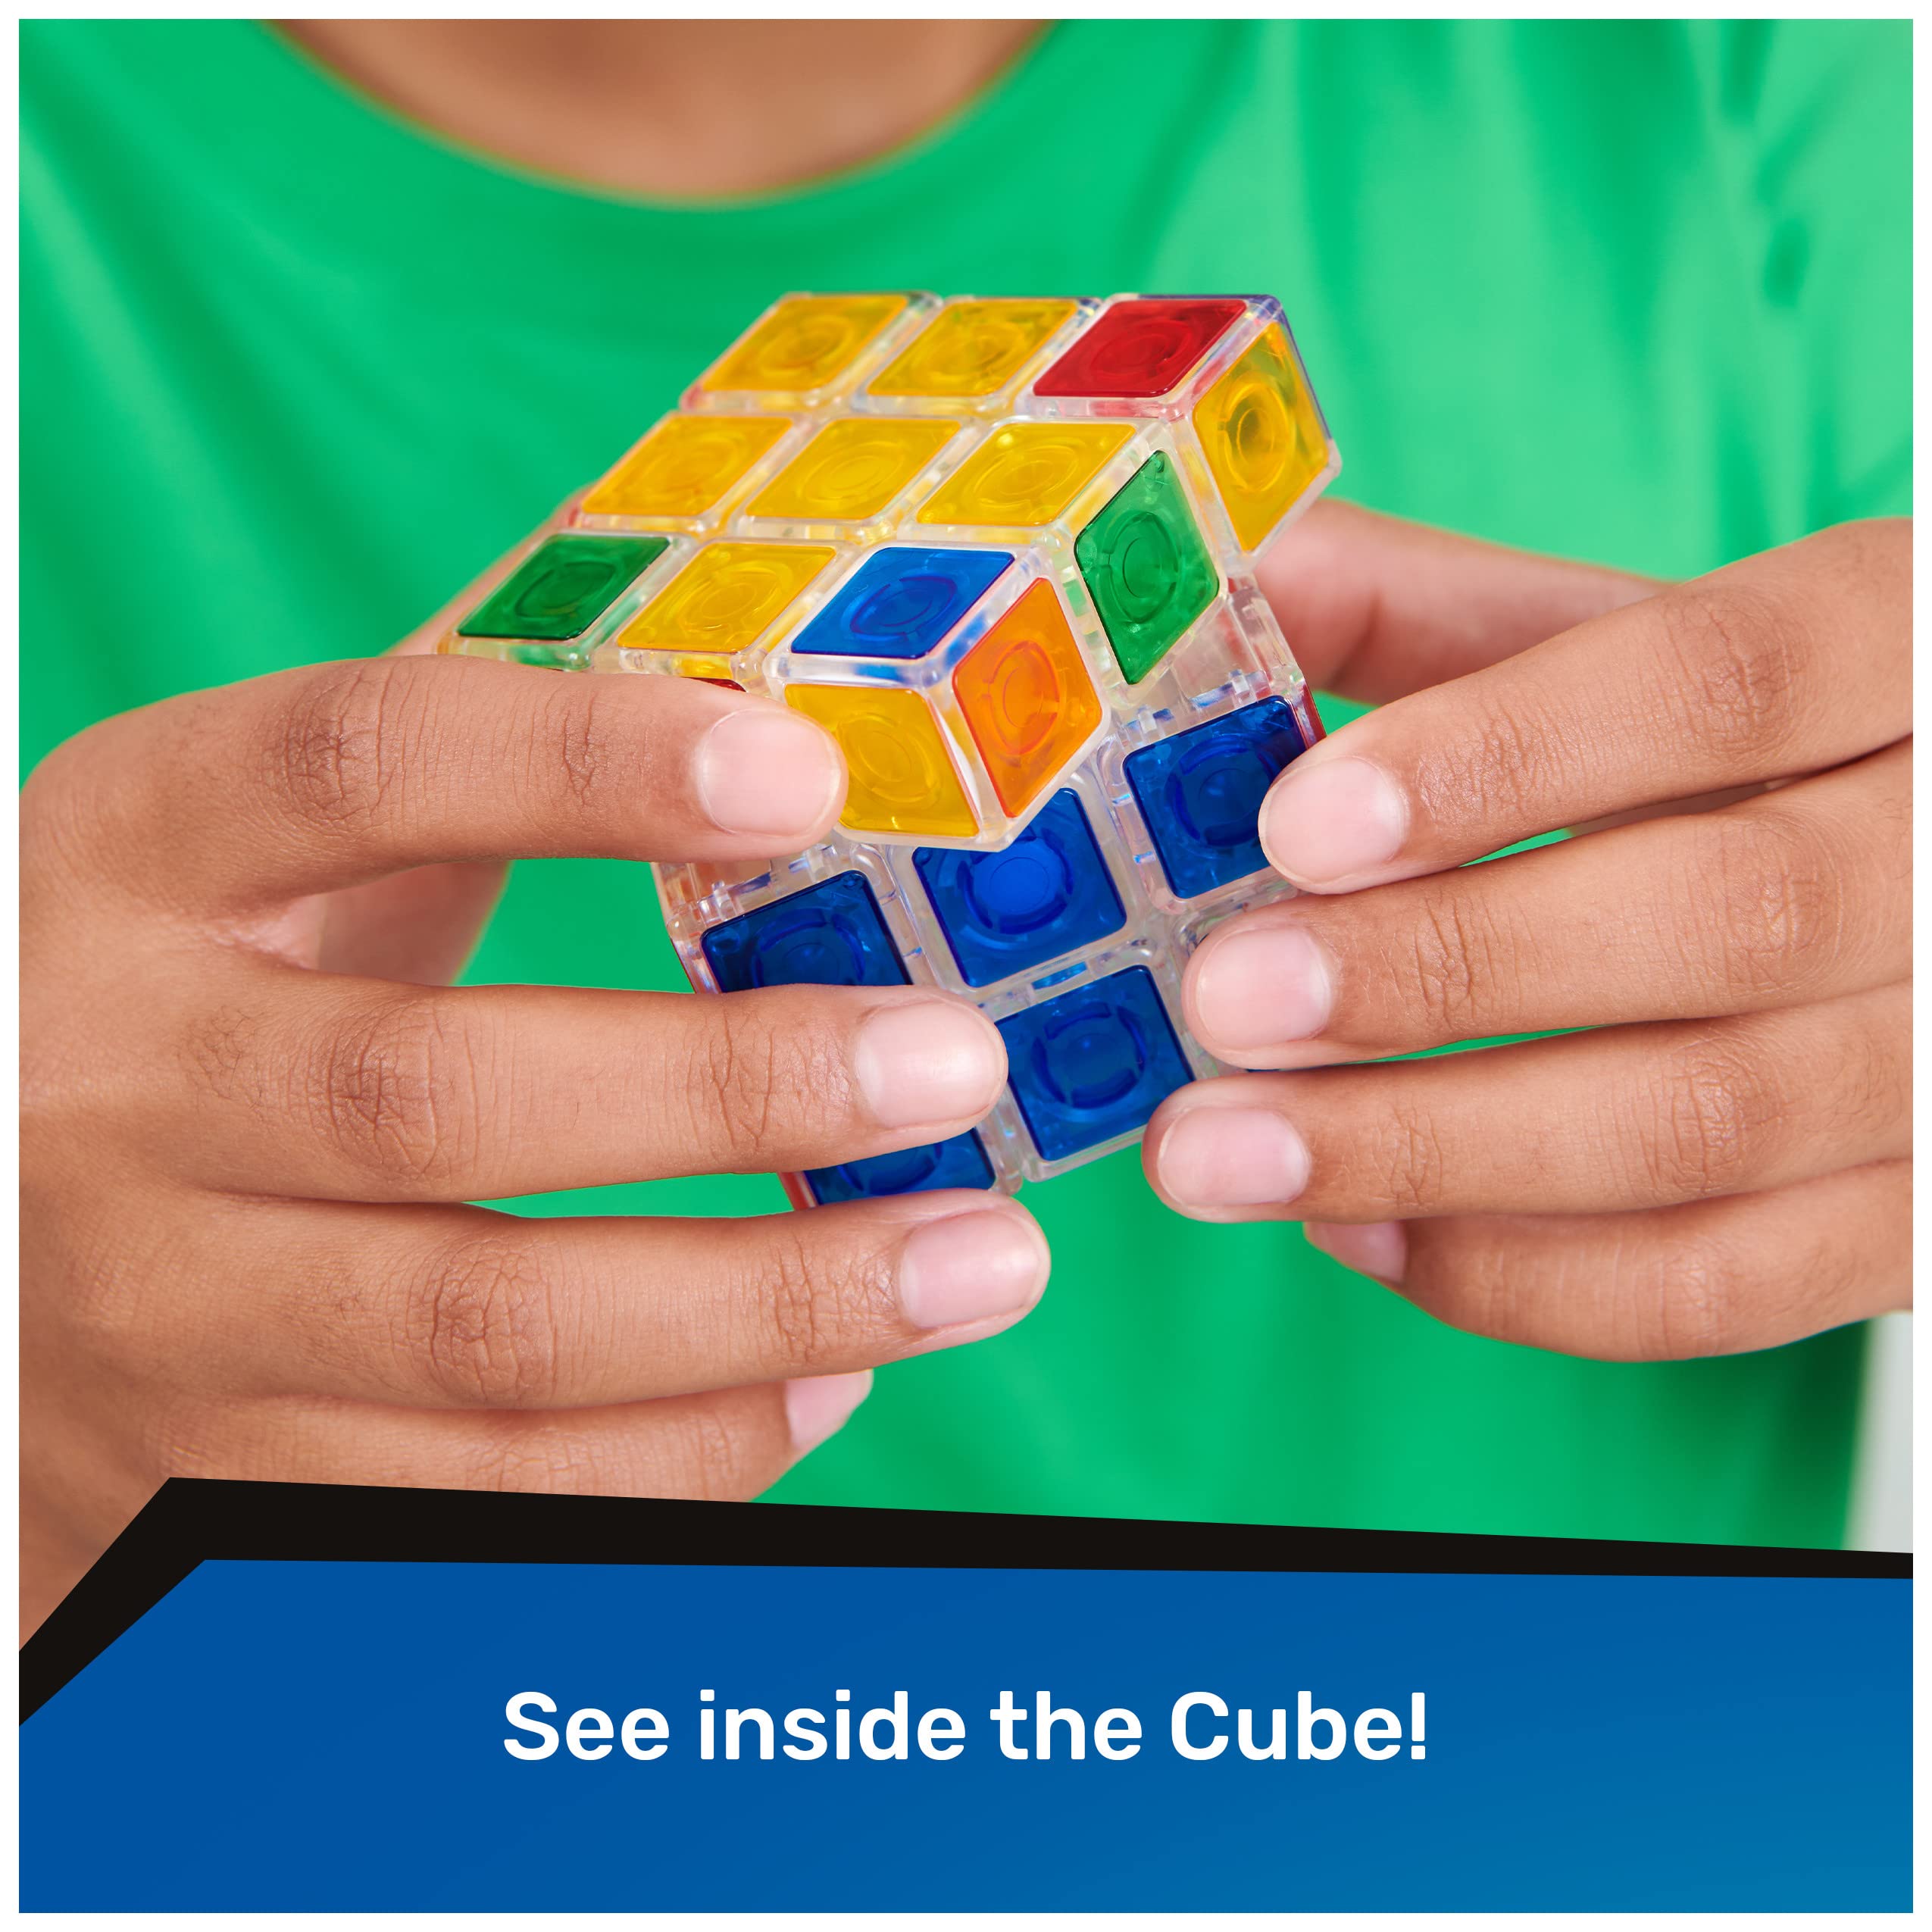 Rubikââ‚¬â„¢s Crystal, New Transparent 3x3 Cube Classic Color-Matching Problem-Solving Brain Teaser Puzzle Game Toy, for Kids and Adults Aged 8 and Up